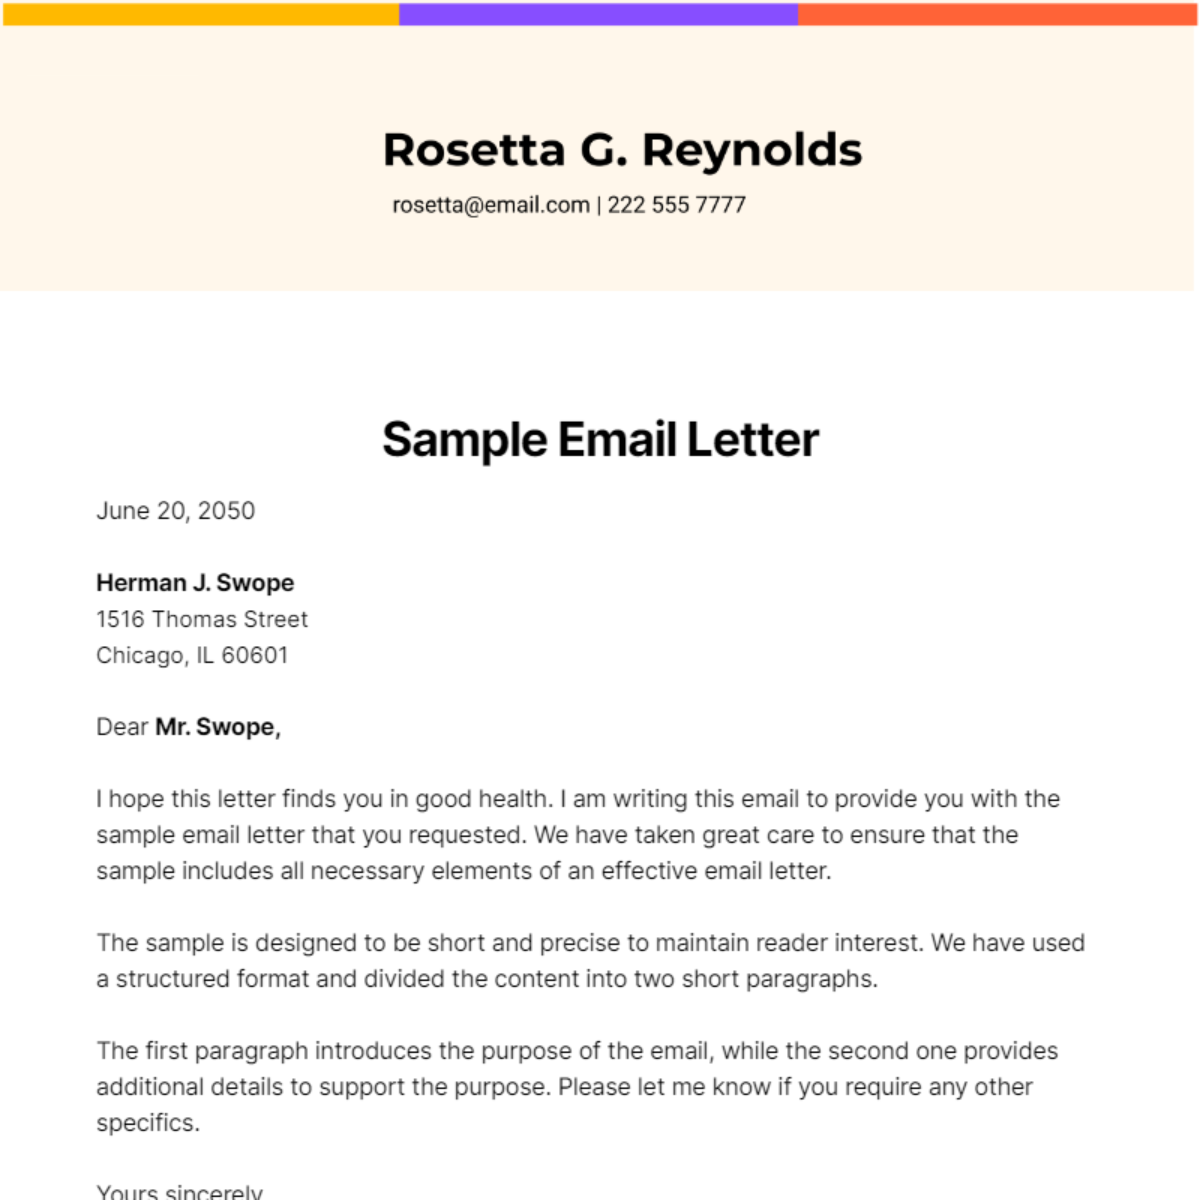 Sample Email Letter Template